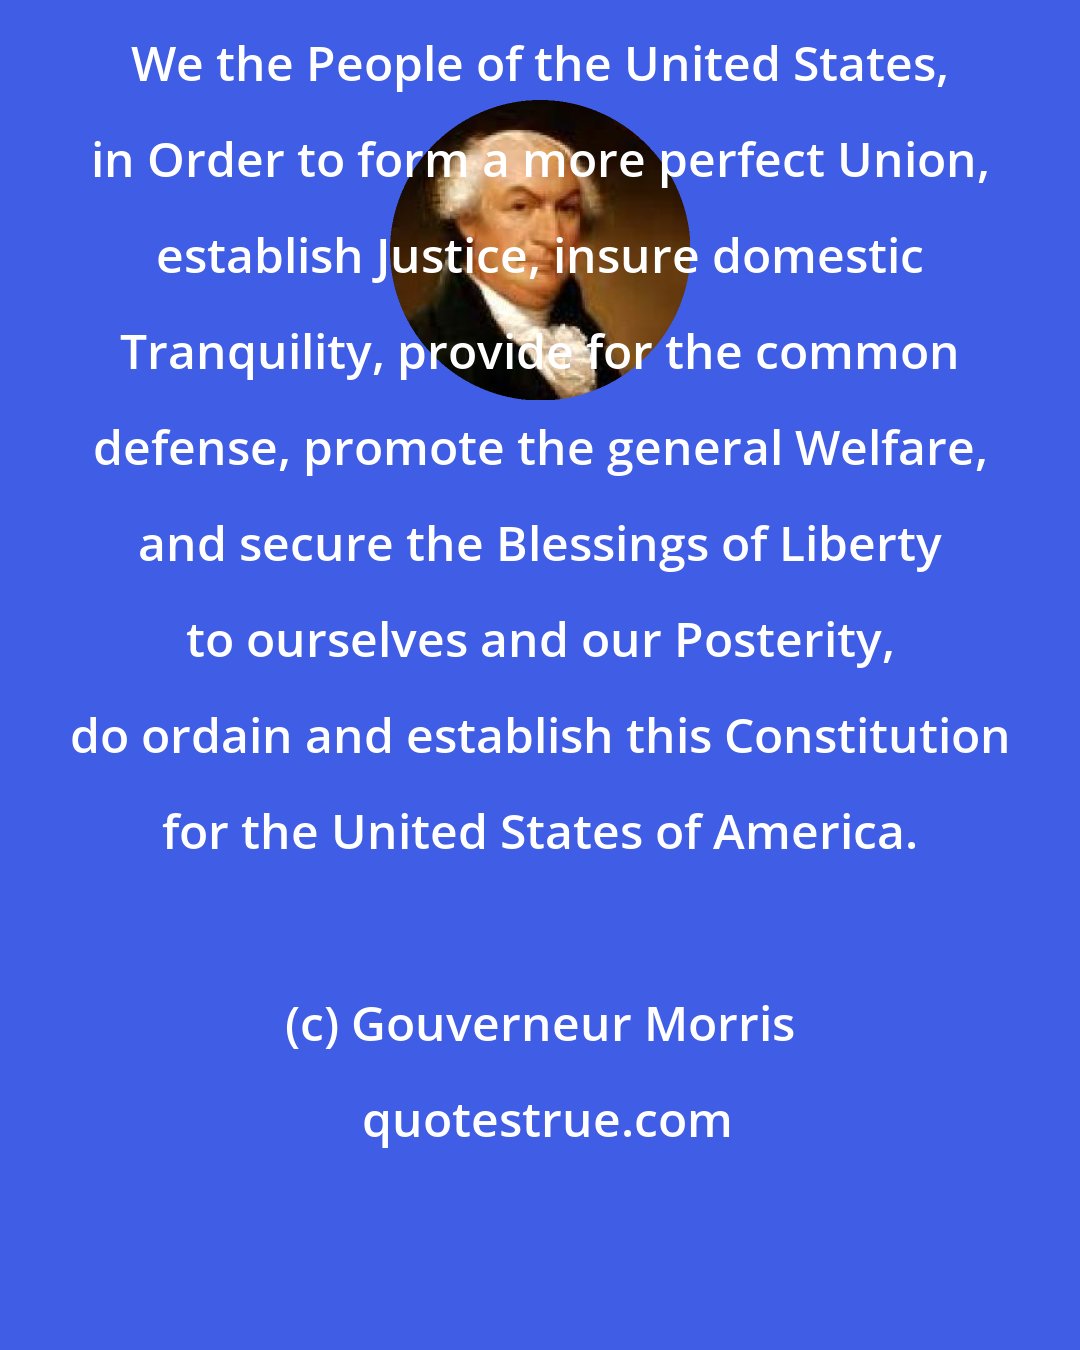 Gouverneur Morris: We the People of the United States, in Order to form a more perfect Union, establish Justice, insure domestic Tranquility, provide for the common defense, promote the general Welfare, and secure the Blessings of Liberty to ourselves and our Posterity, do ordain and establish this Constitution for the United States of America.